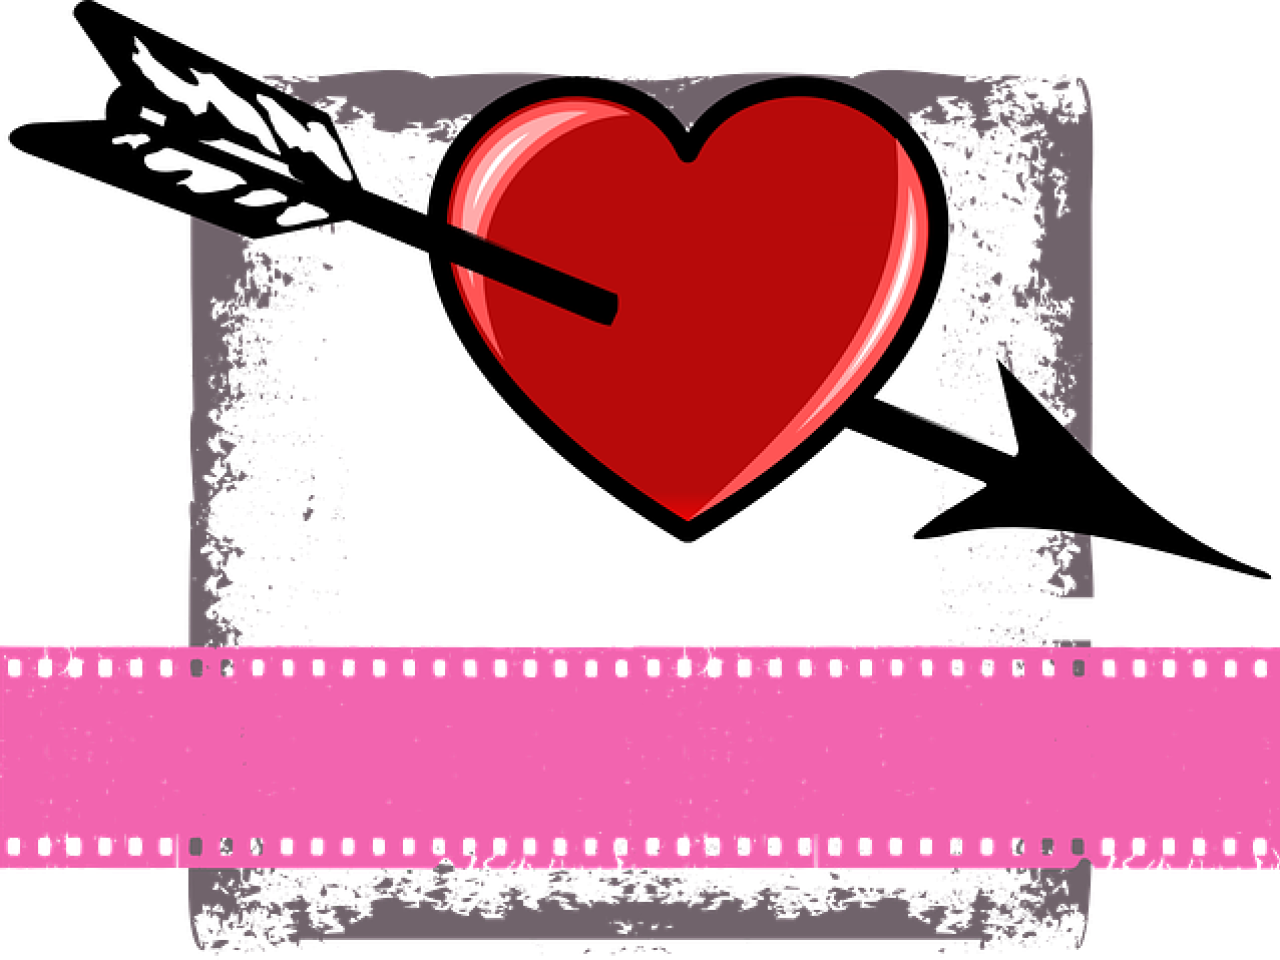 A drawing of a bright red heart pierced by an arrow framed by a grungy gray box with a pink film strip spanning along the bottom of the image.